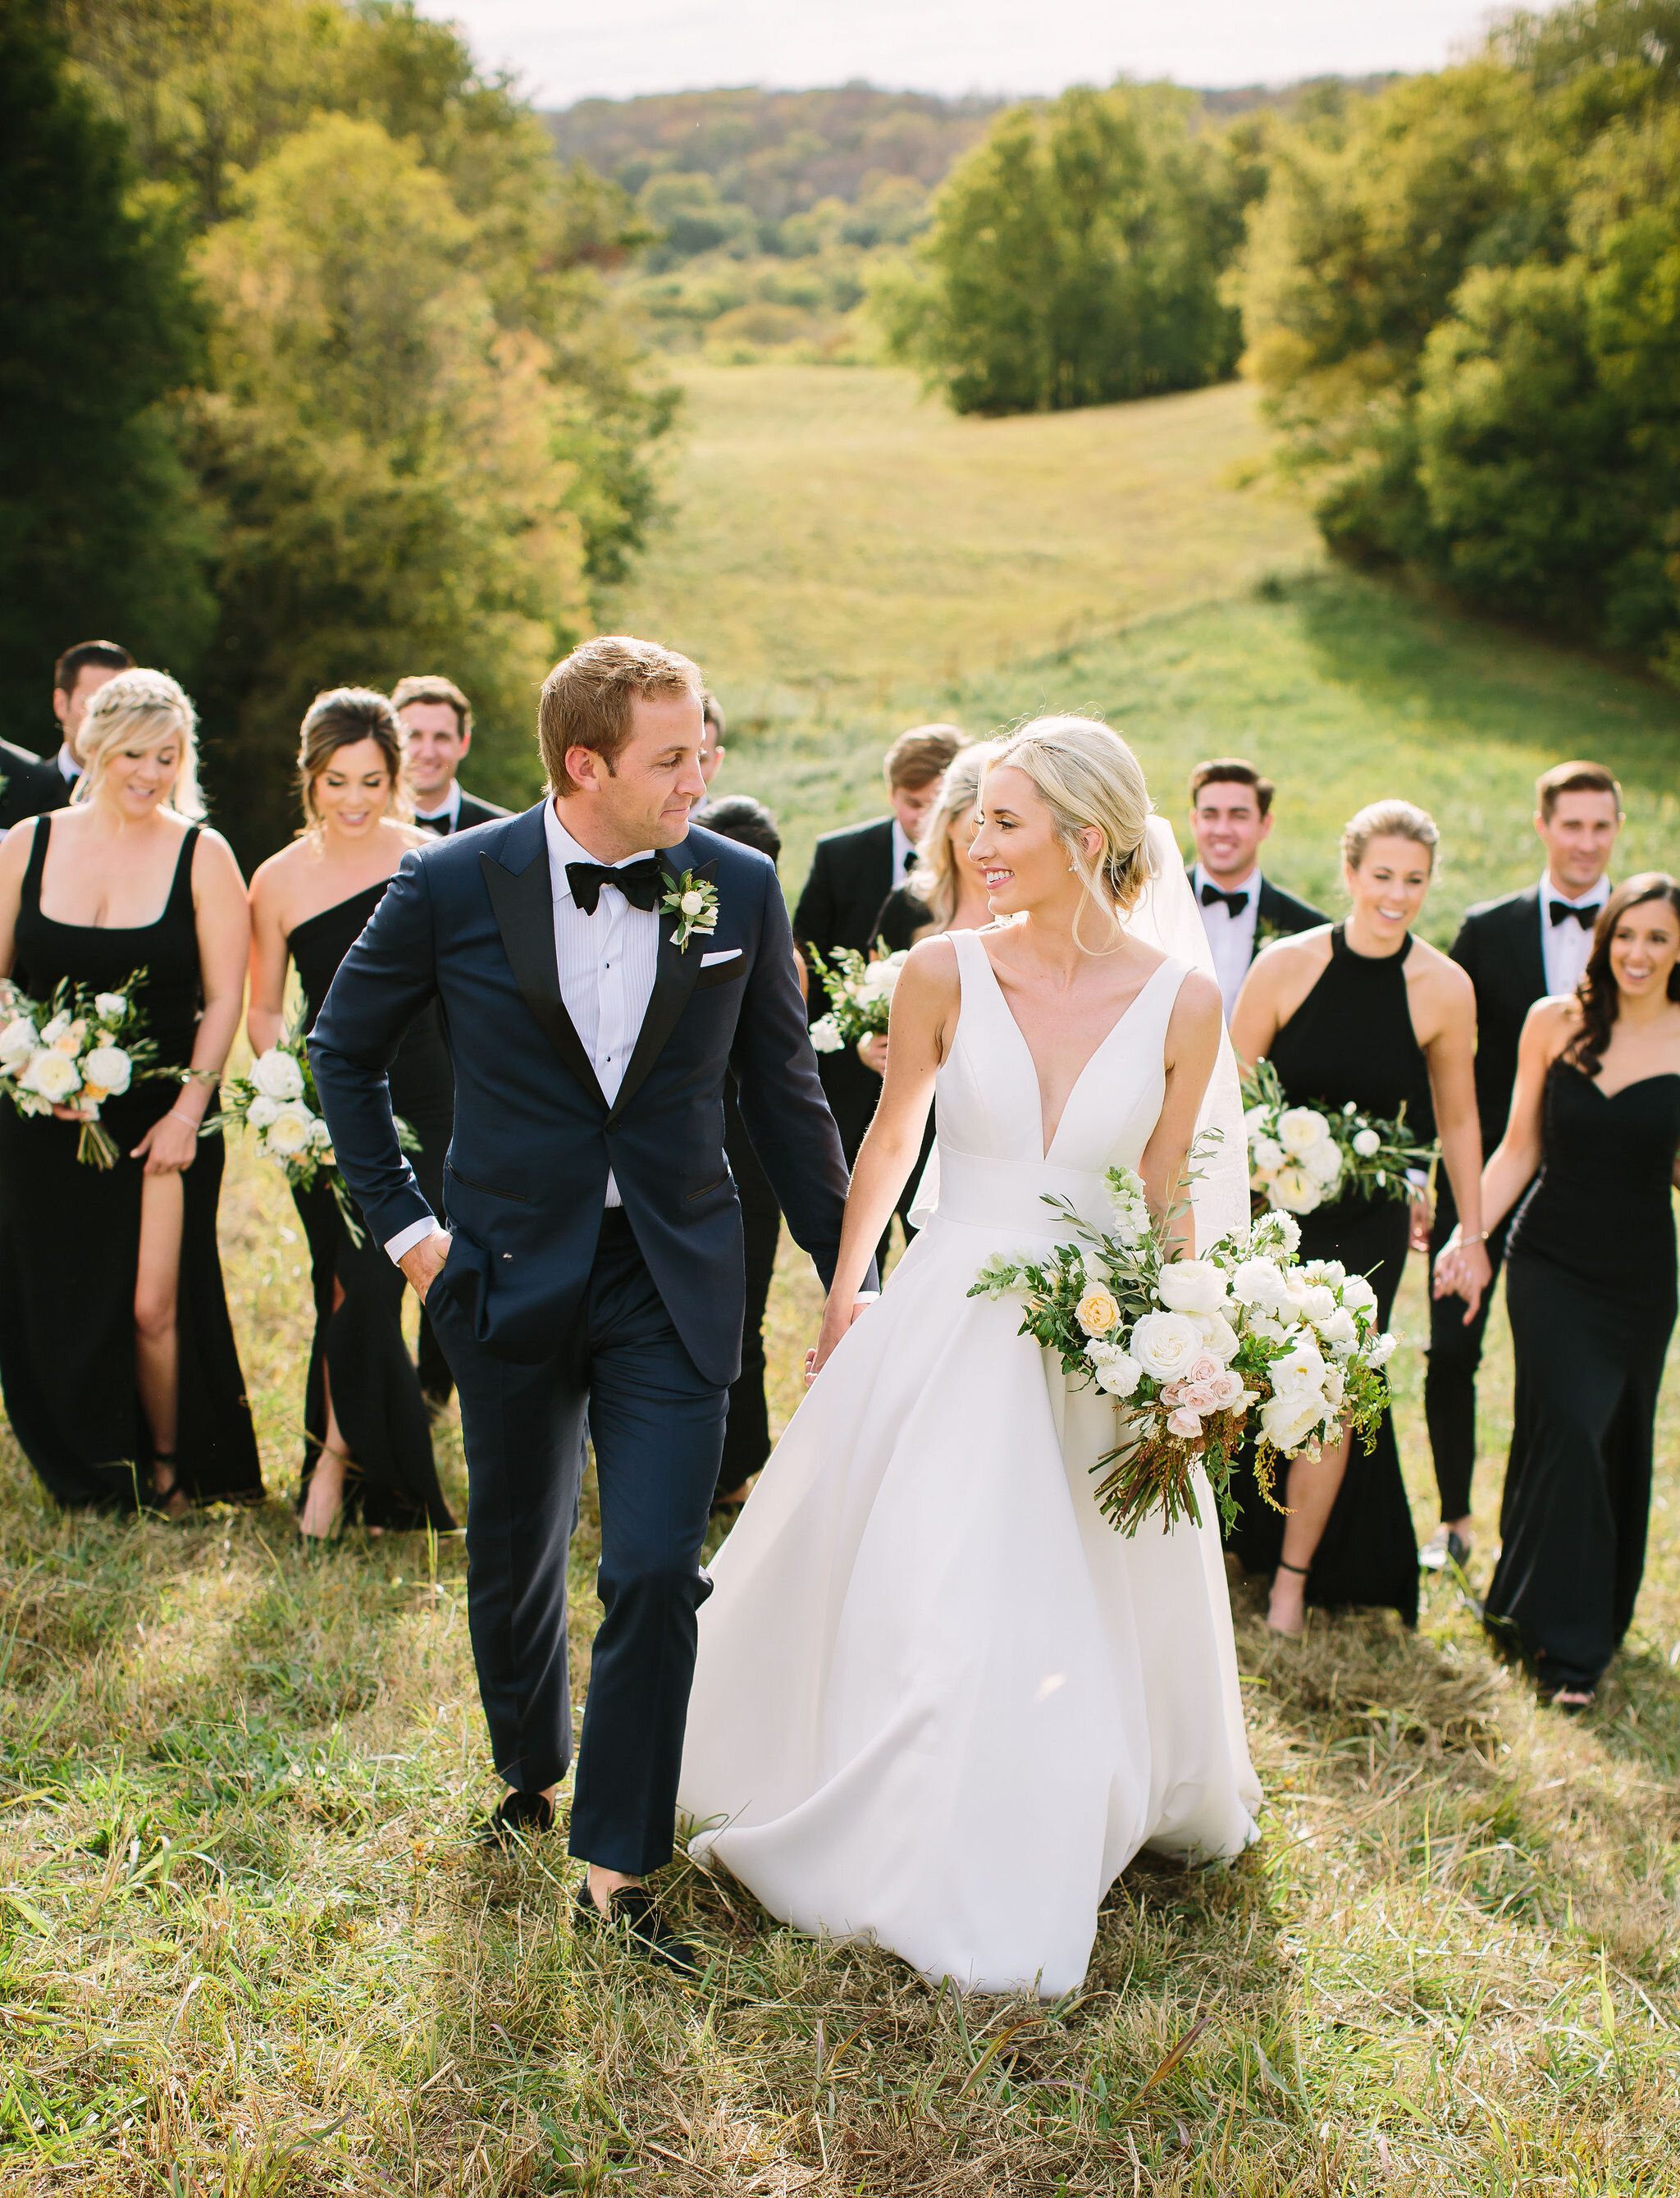 Tennessee countryside October wedding at Bloomsberry Farm with all white and greenery floral design. Nashville wedding florist.